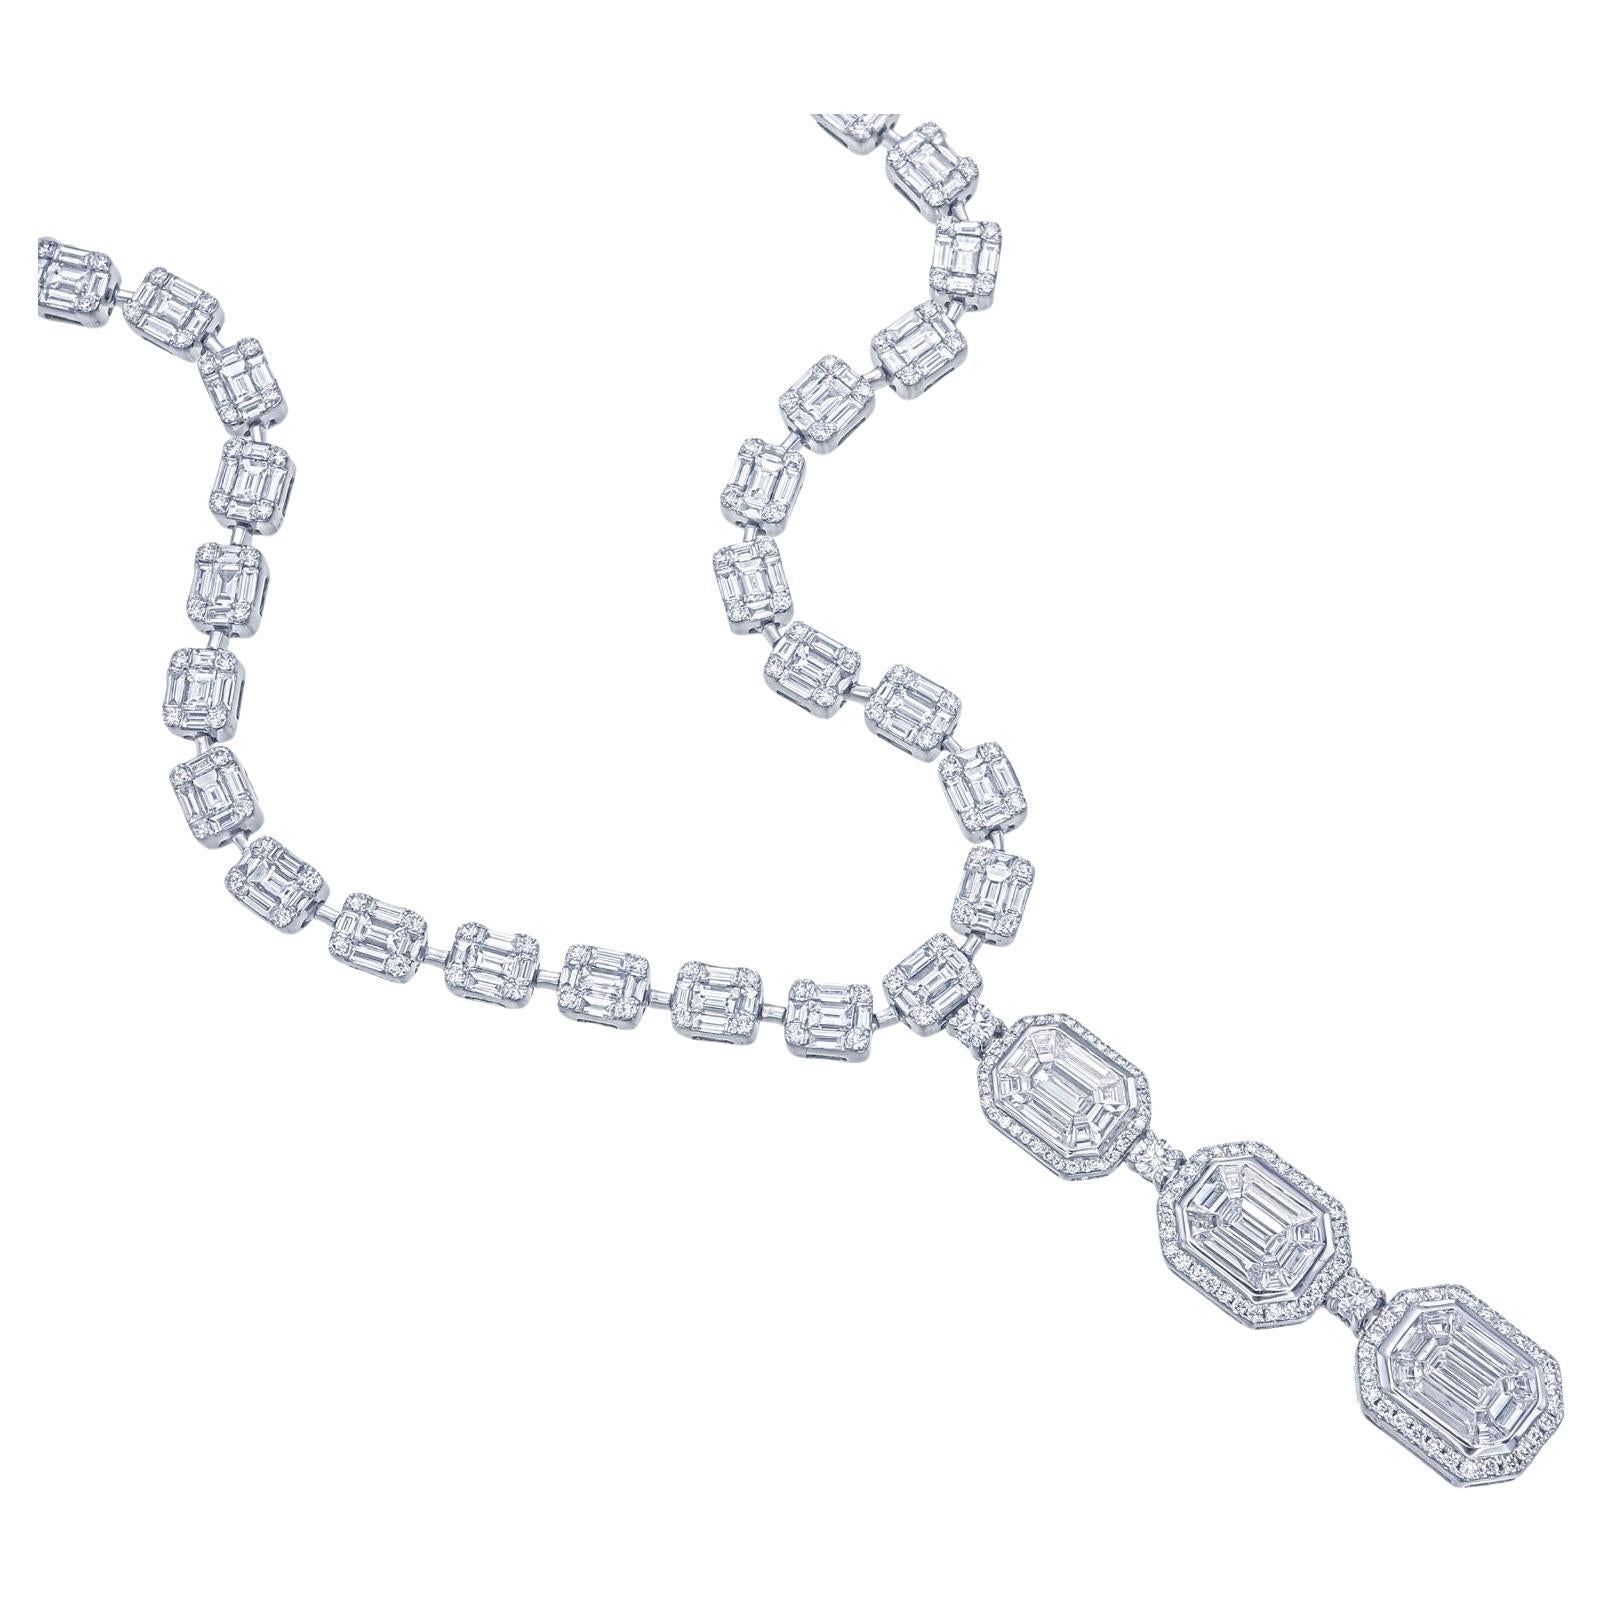 This is a grand Necklace with all around diamonds 
Emerald illusion features precisely arranged diamonds that resemble an emerald-cut stone
This dazzling 18kt white gold 16 inch necklace showcases 12.50 cts of round, Baguette & Pie cut diamonds,